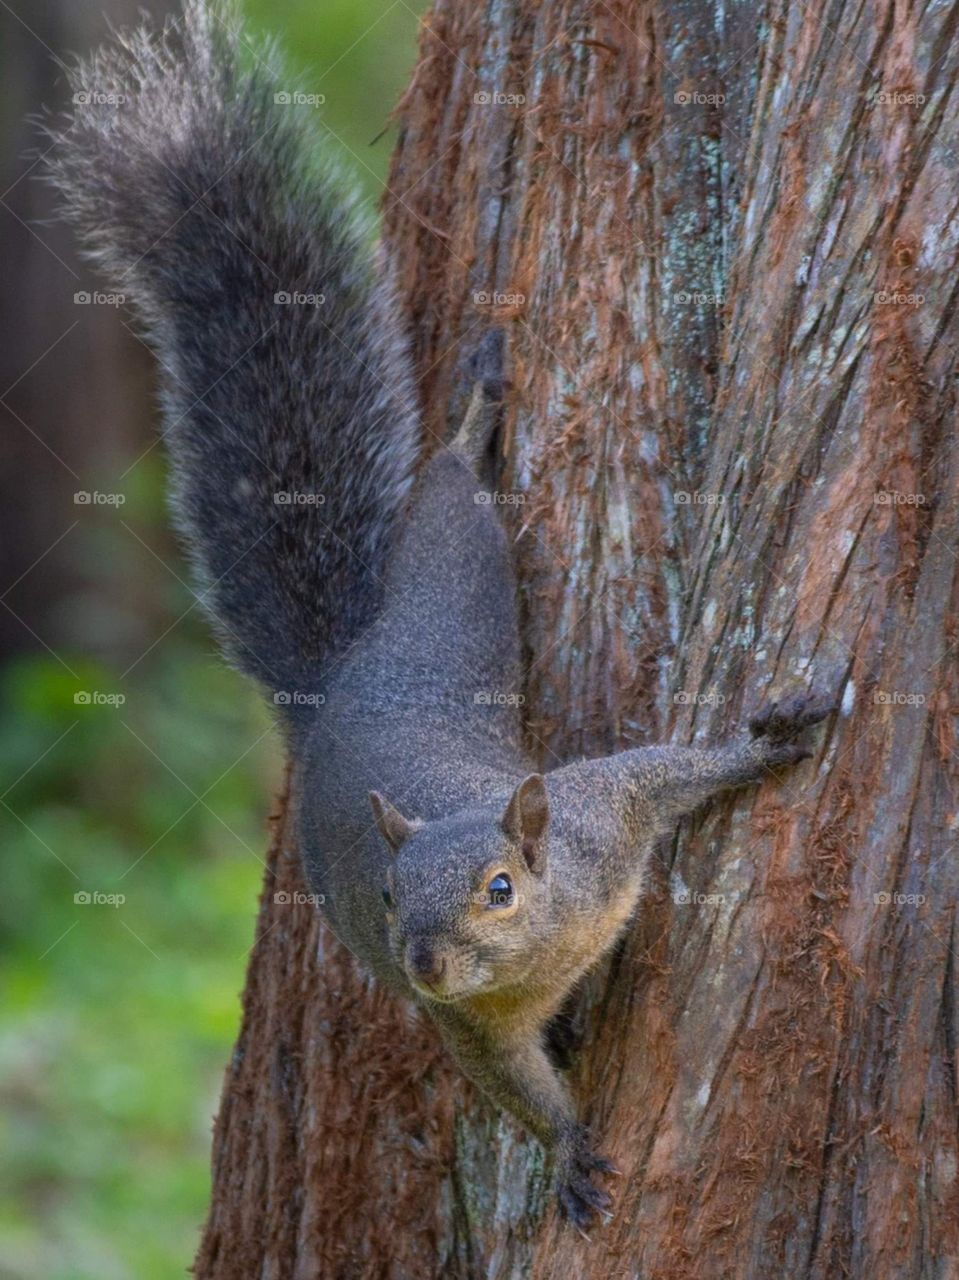 playful brown, gray, and tan squirrel coming for peanuts clinging to the trunk of the tree looking at the camera